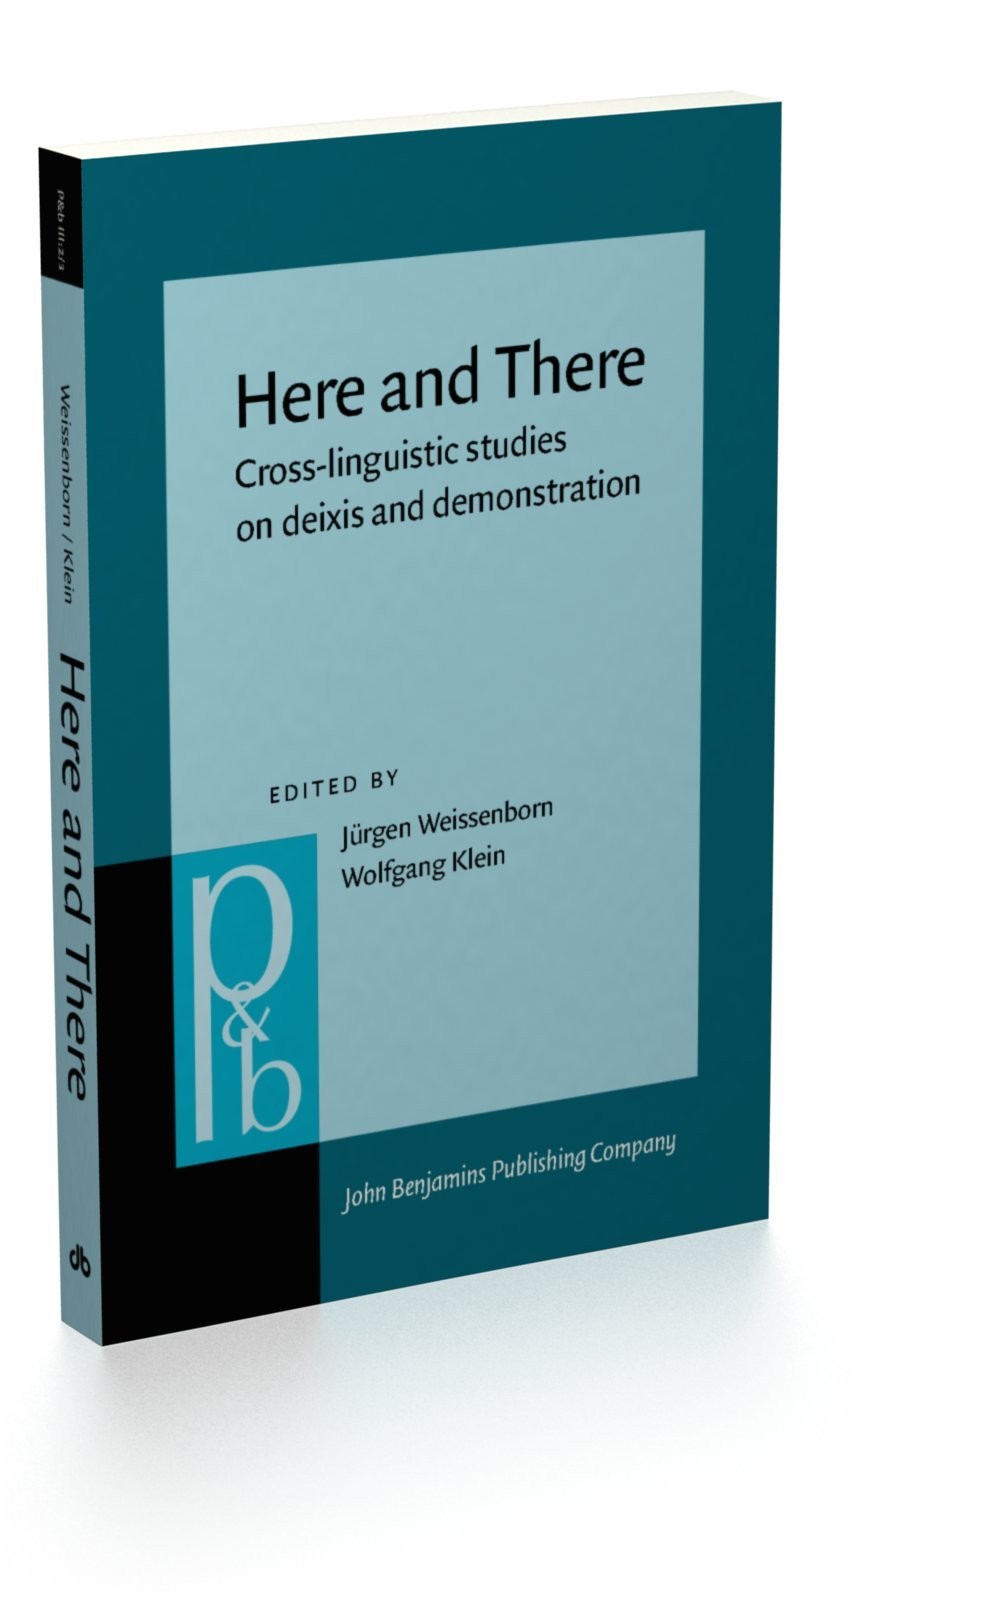 Here and There: Cross-Linguistic Studies on Deixis and Demonstration